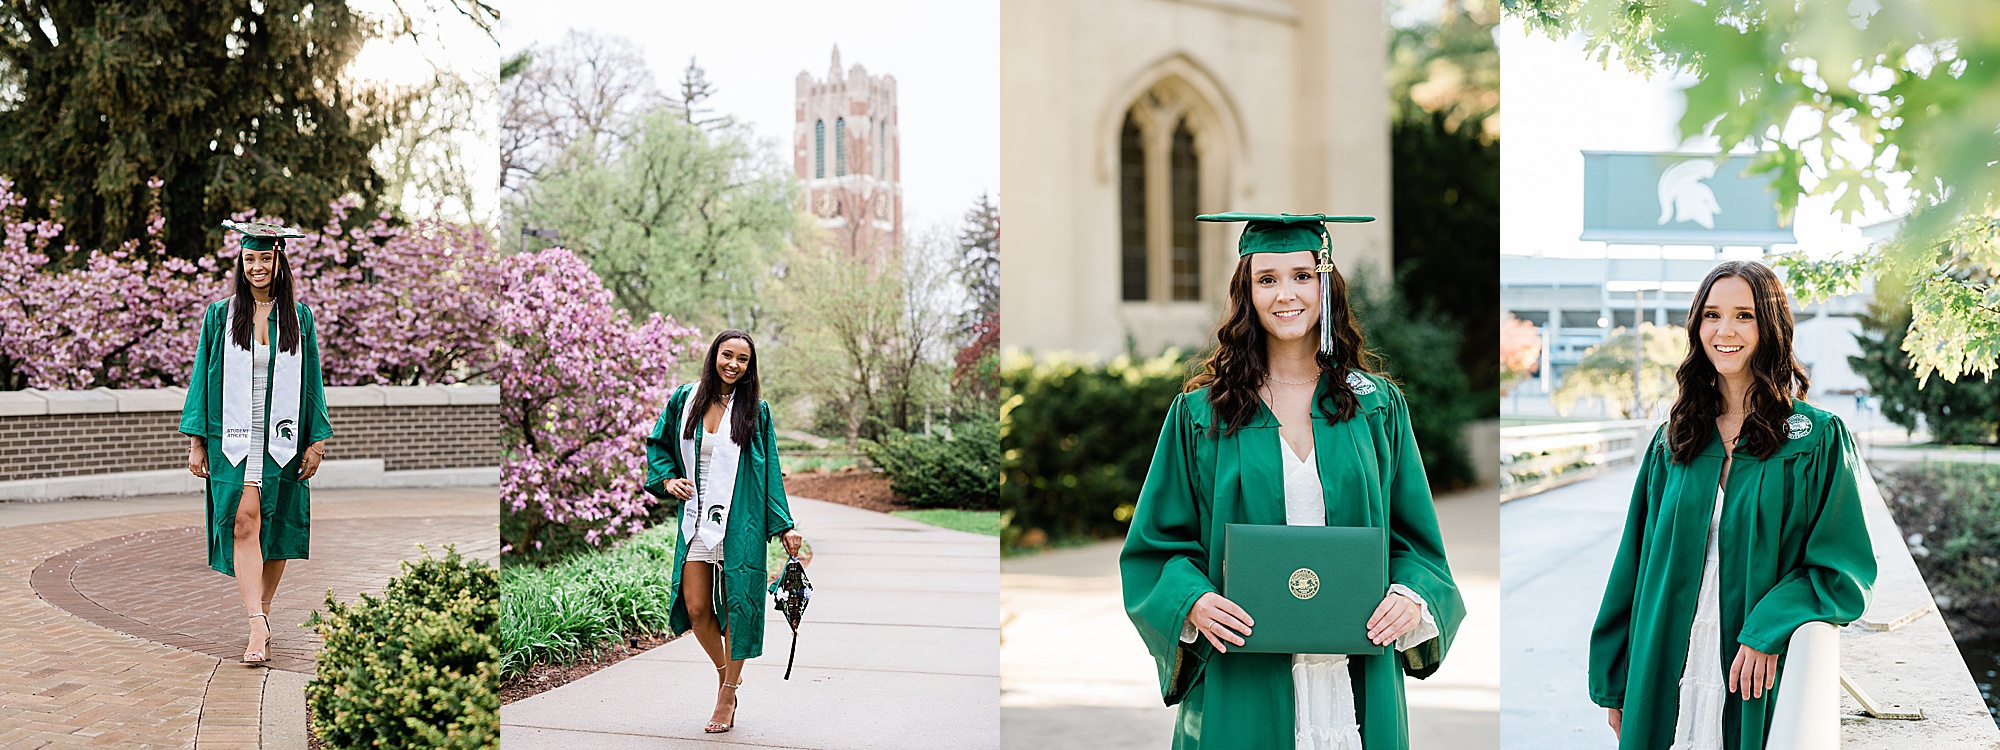 Michigan State senior graduation photo ideas with cap and gown